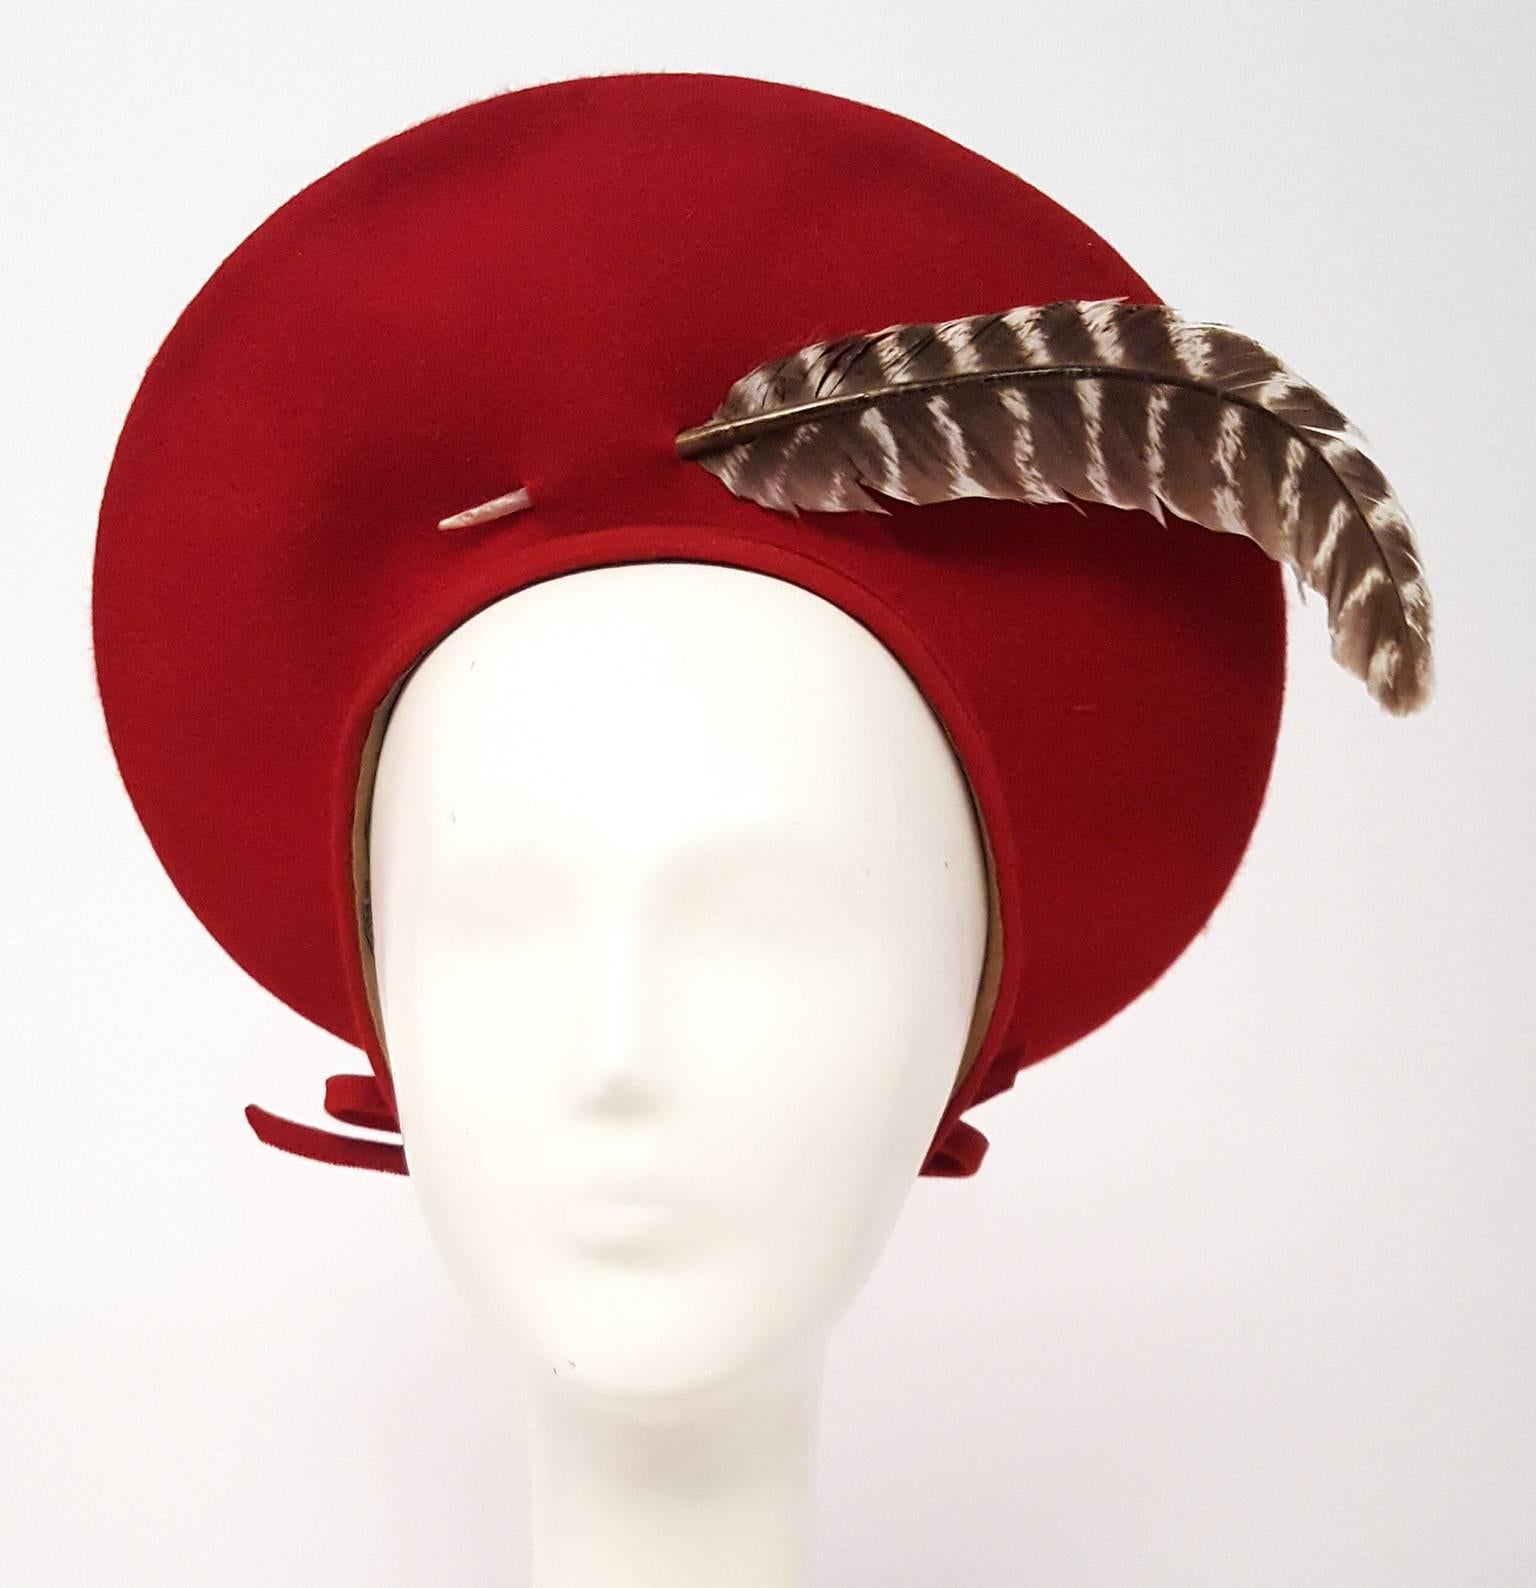 40s Red Felt Beret Hat w/ Feather Detail. Bow detail at back. 

20 1/2" hat band circumference
11 1/2" diameter